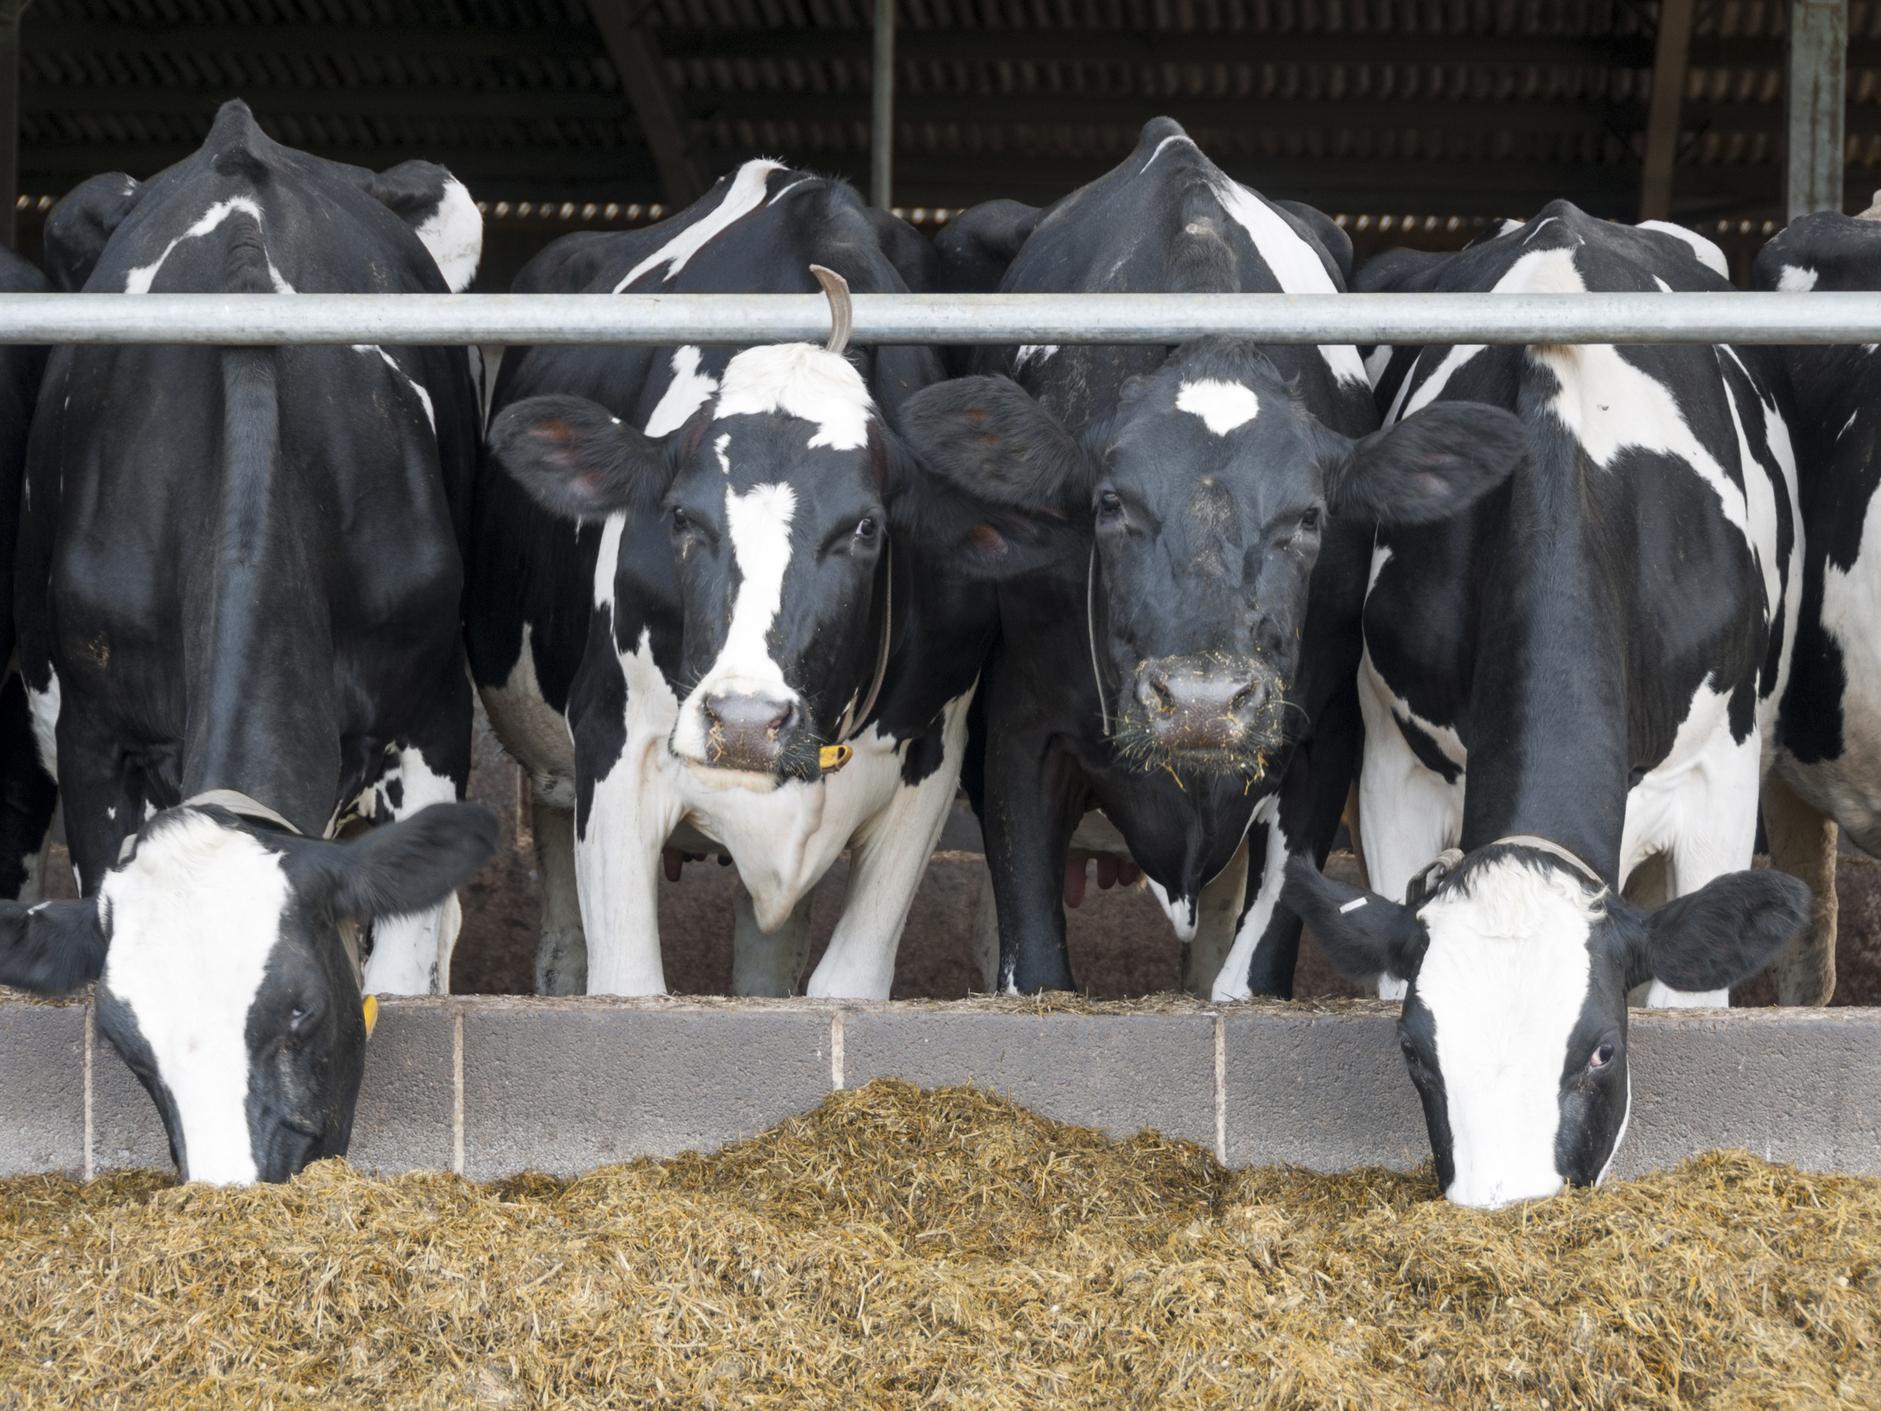 Ireland's dairy herd has been increasing in recent years, and so have the levels of climate change-inducing gases emitted by the cows